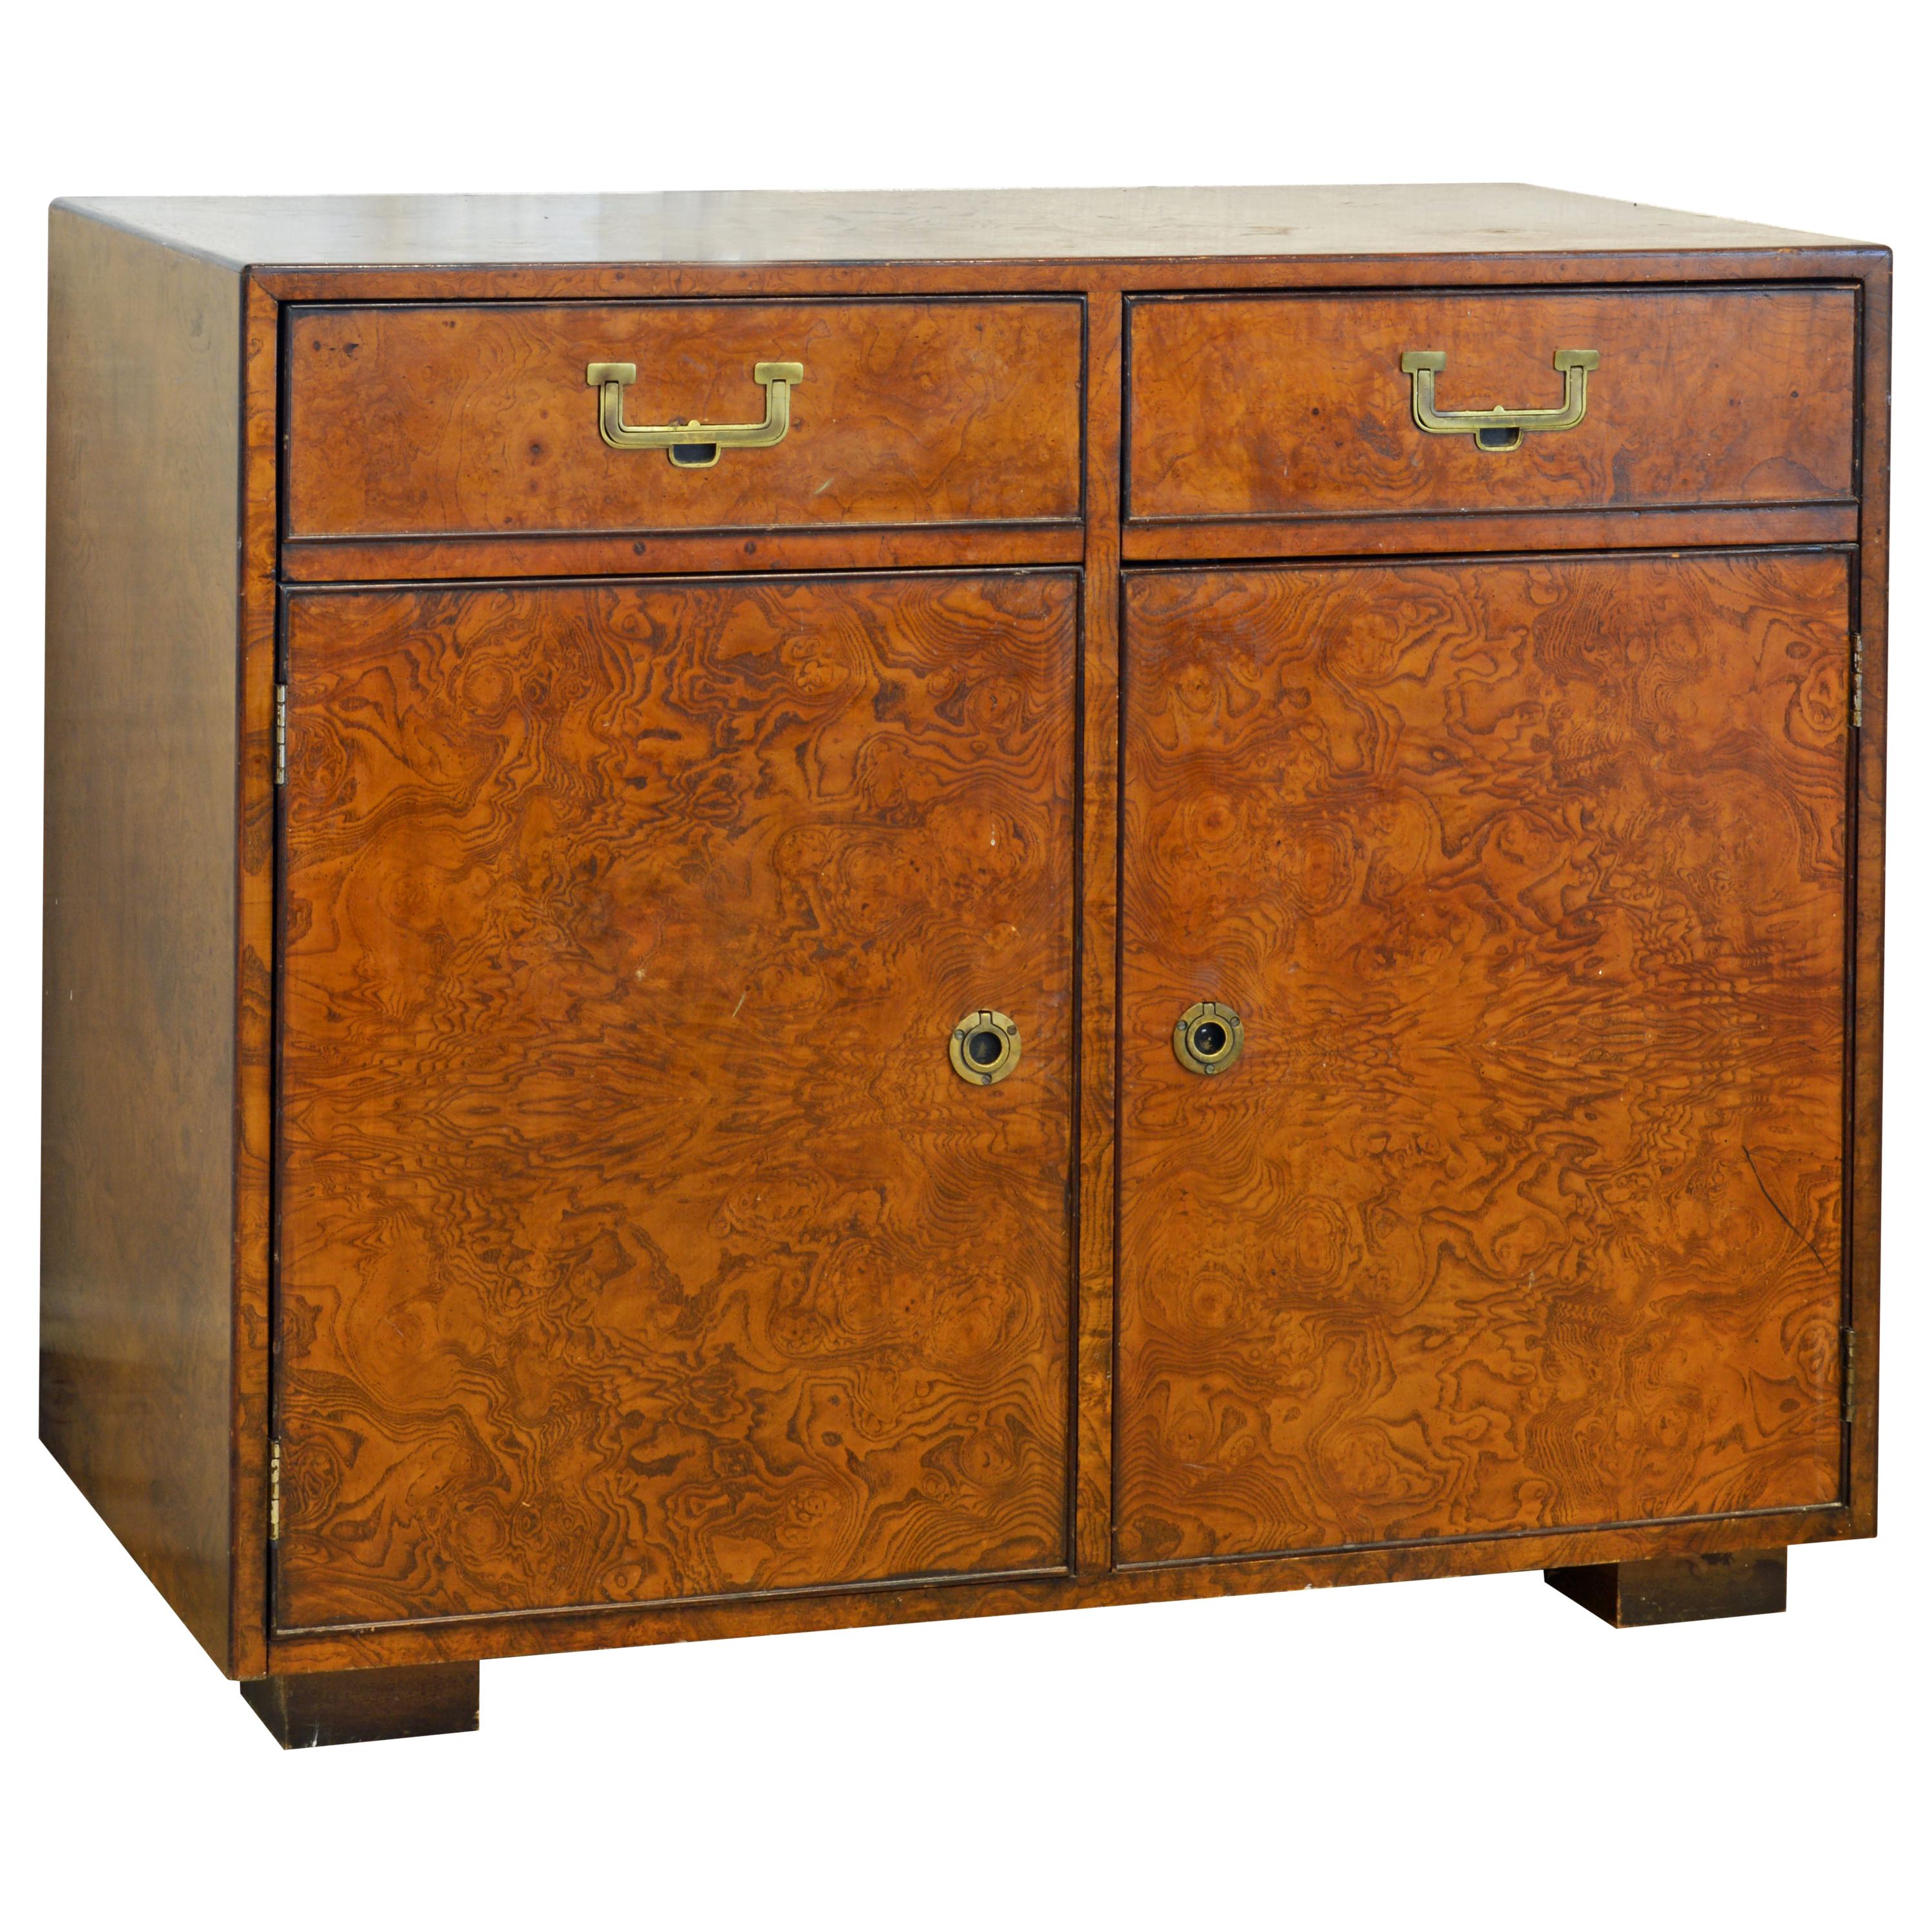 Midcentury Campaign Style Two-Drawer Burled Walnut Cabinet by John Widdicomb